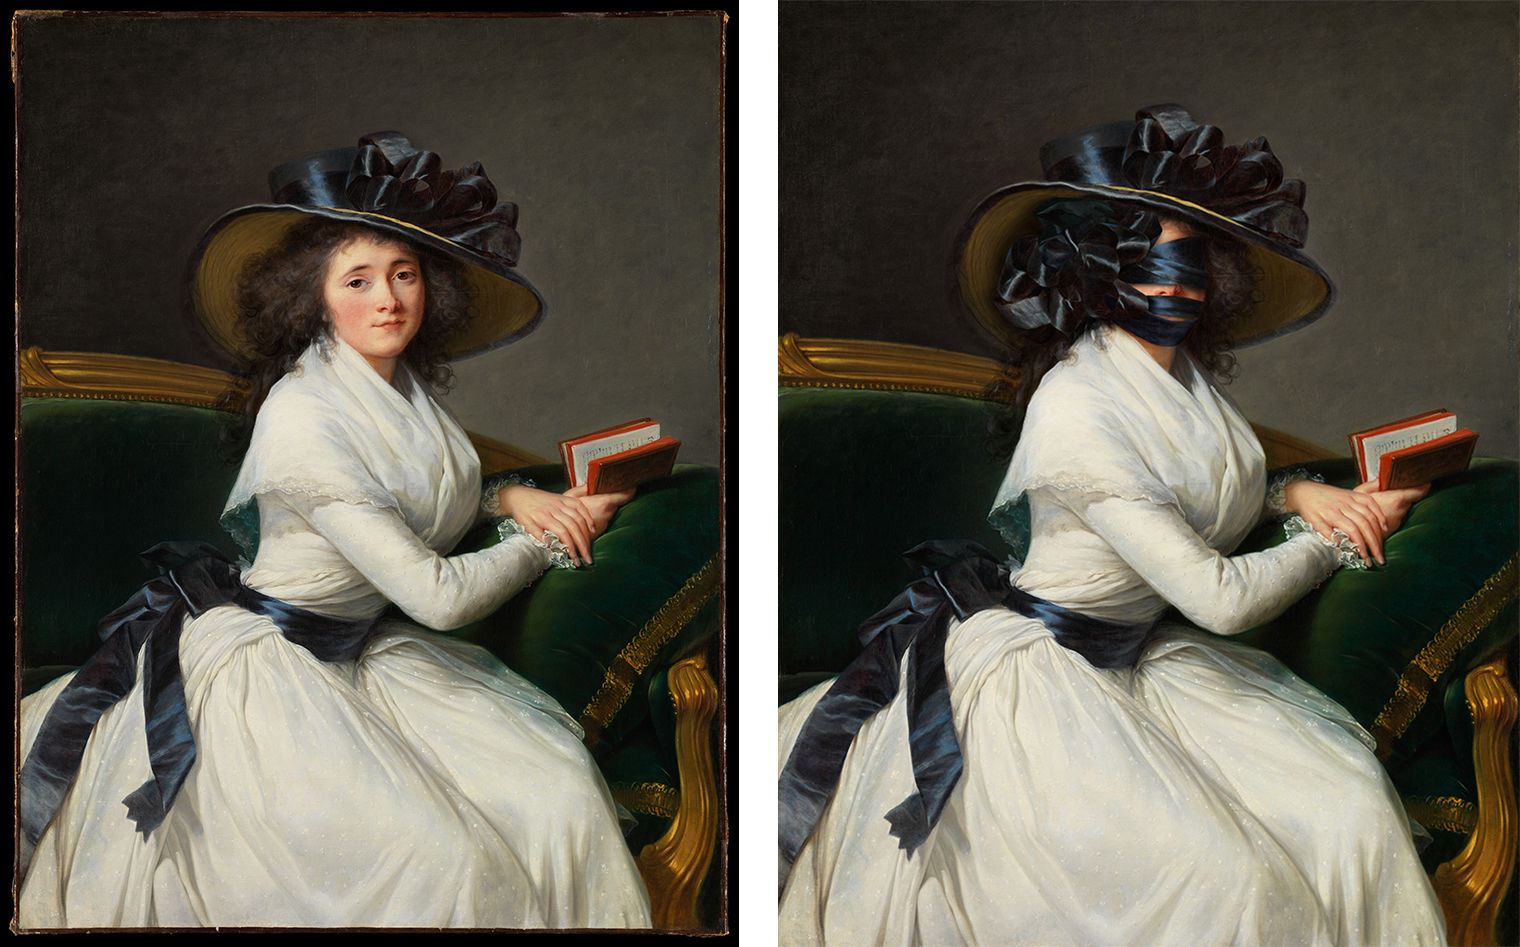 image on left shows a woman in a white dress wearing a broad hat and sitting with a book, image on right shows the same image with ribbon covering the woman's face